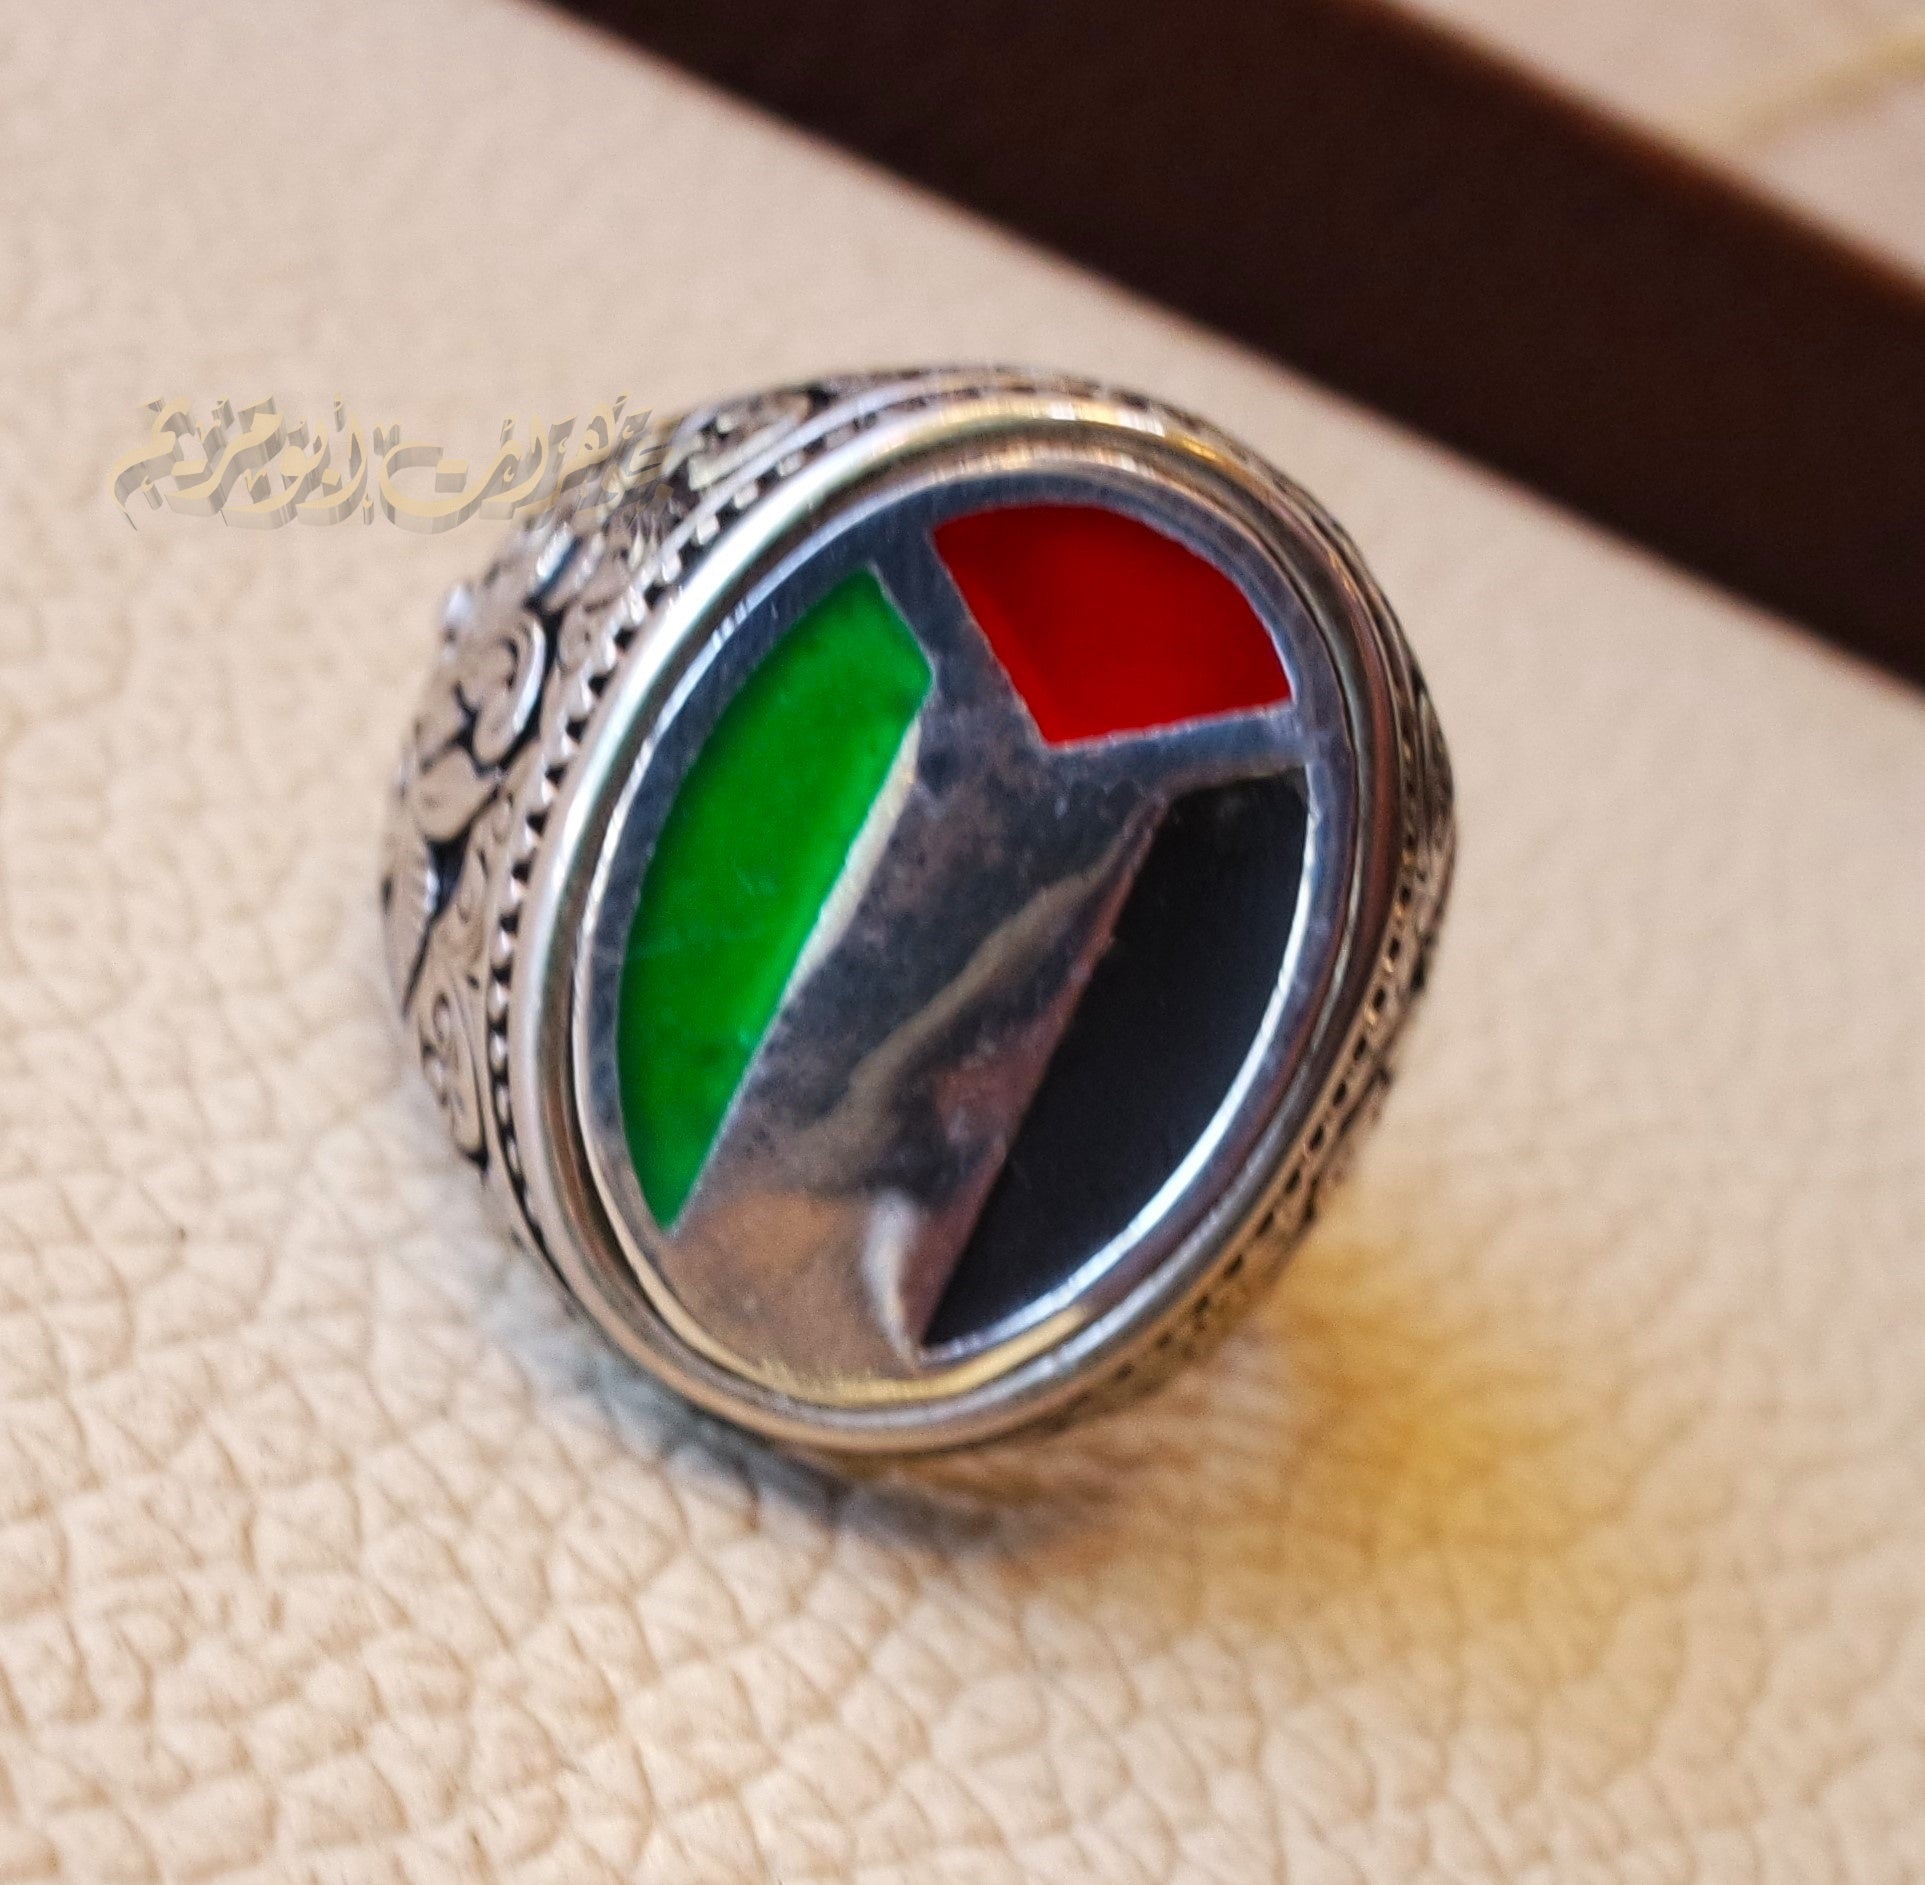 Palestine flag man ring 2 sterling silver and color enamel Arabic middle eastern turkey oriental antique style fast shipping all sizes